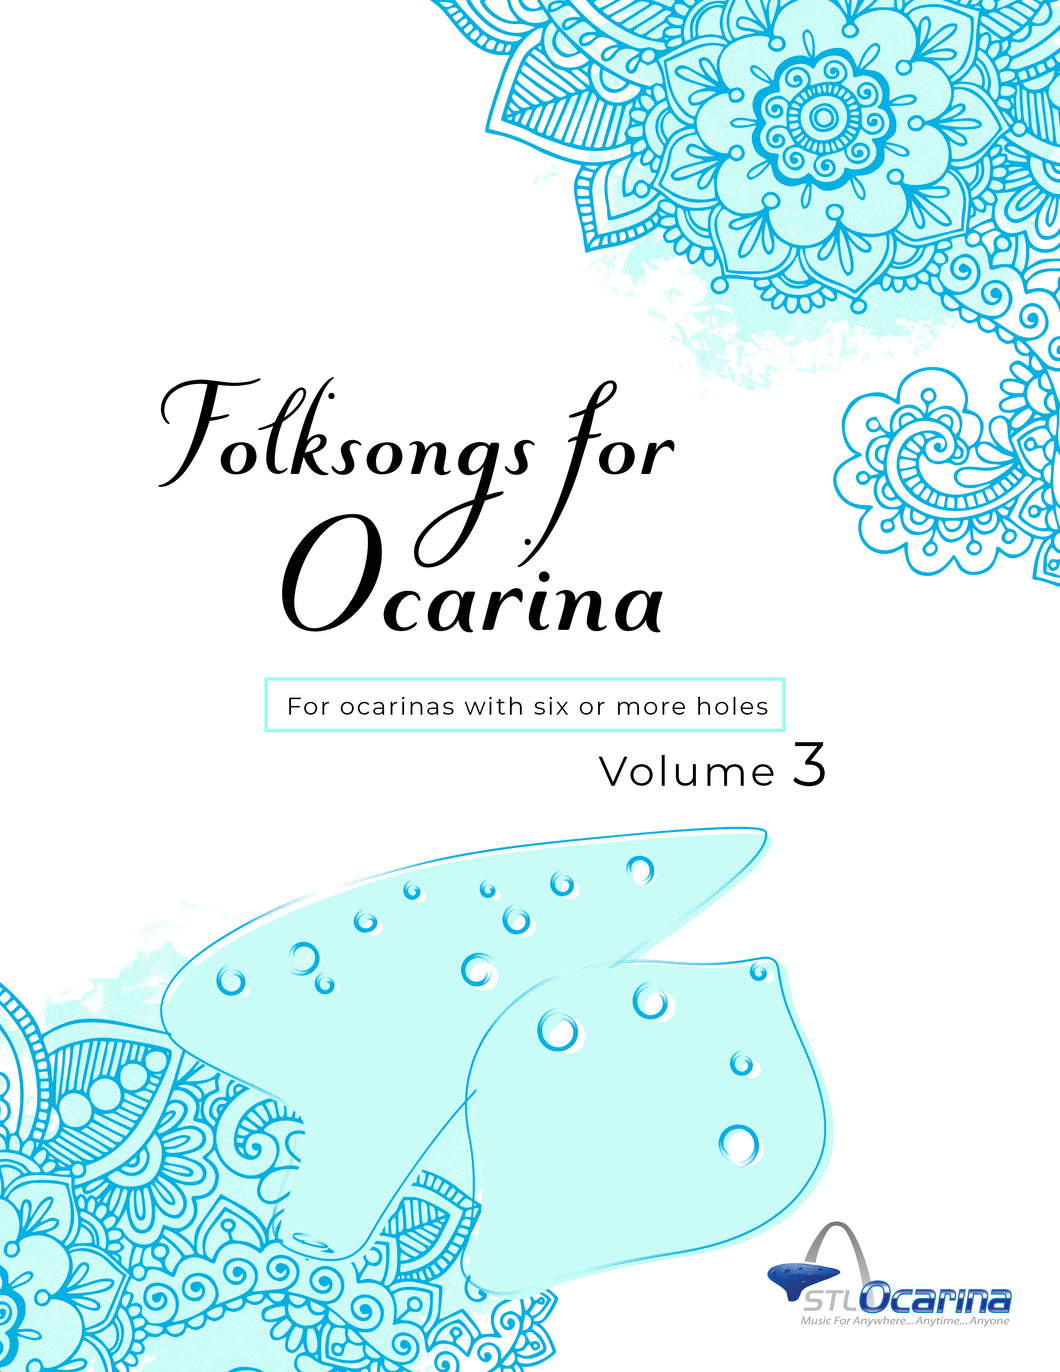 Folksongs for Ocarinas and Treble Instruments Volume 3